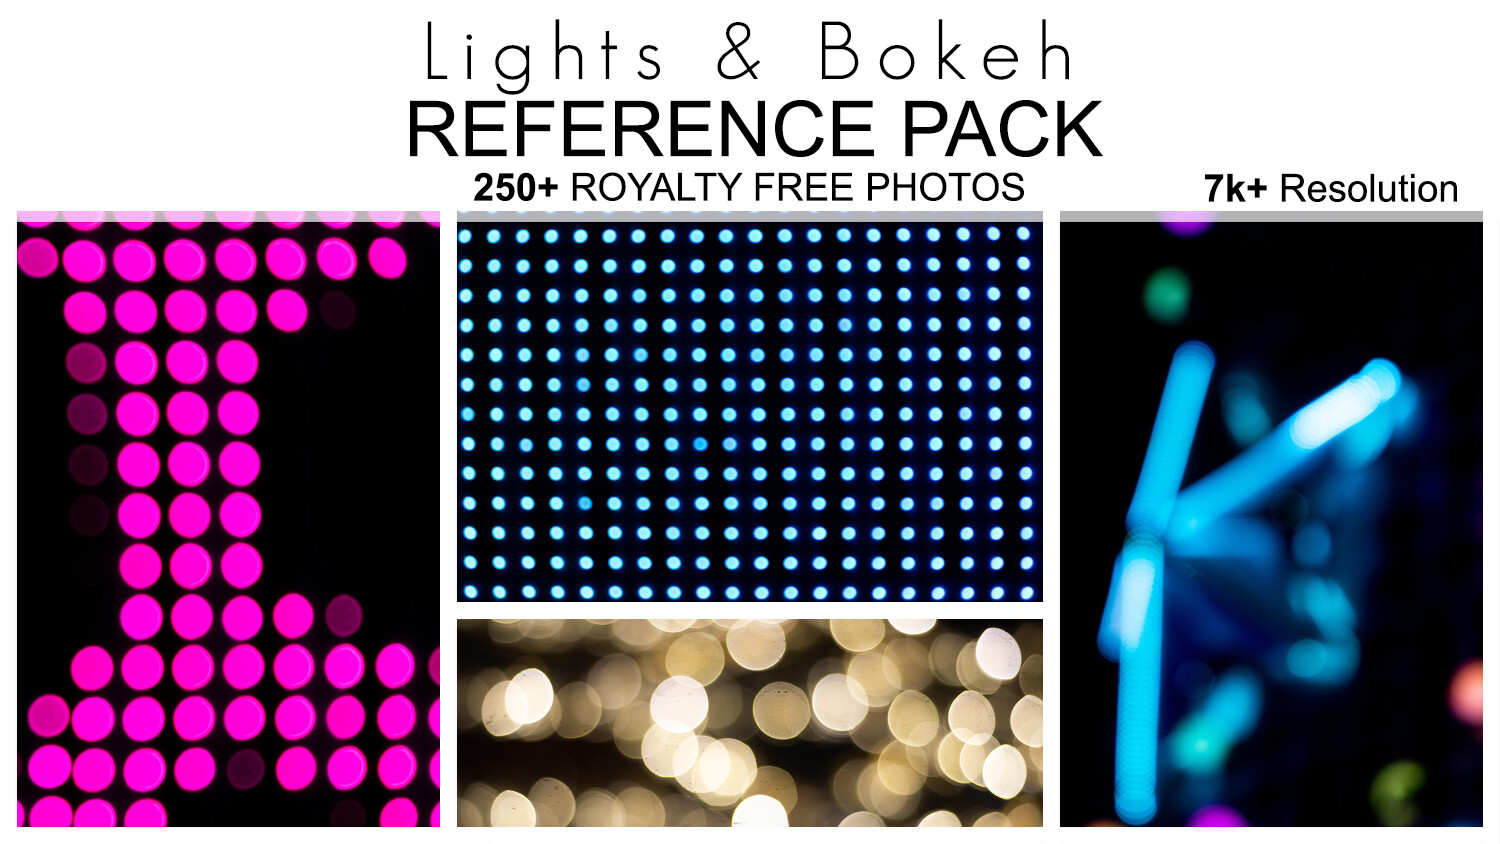 Reference Pack - Lights & Bokeh - 250+ Royalty Free Photos